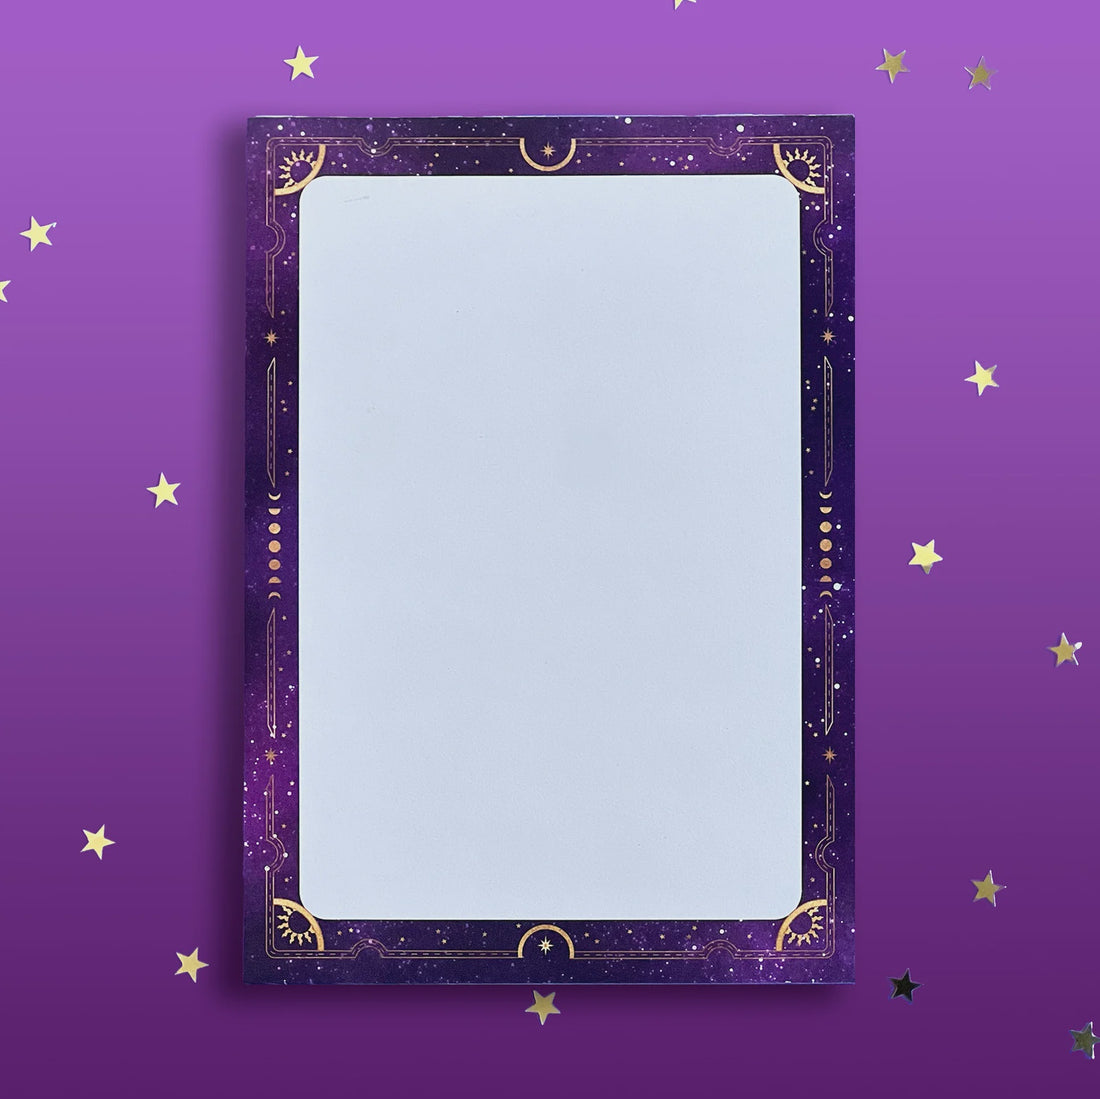 Made of Stars A5 Blank Notepad